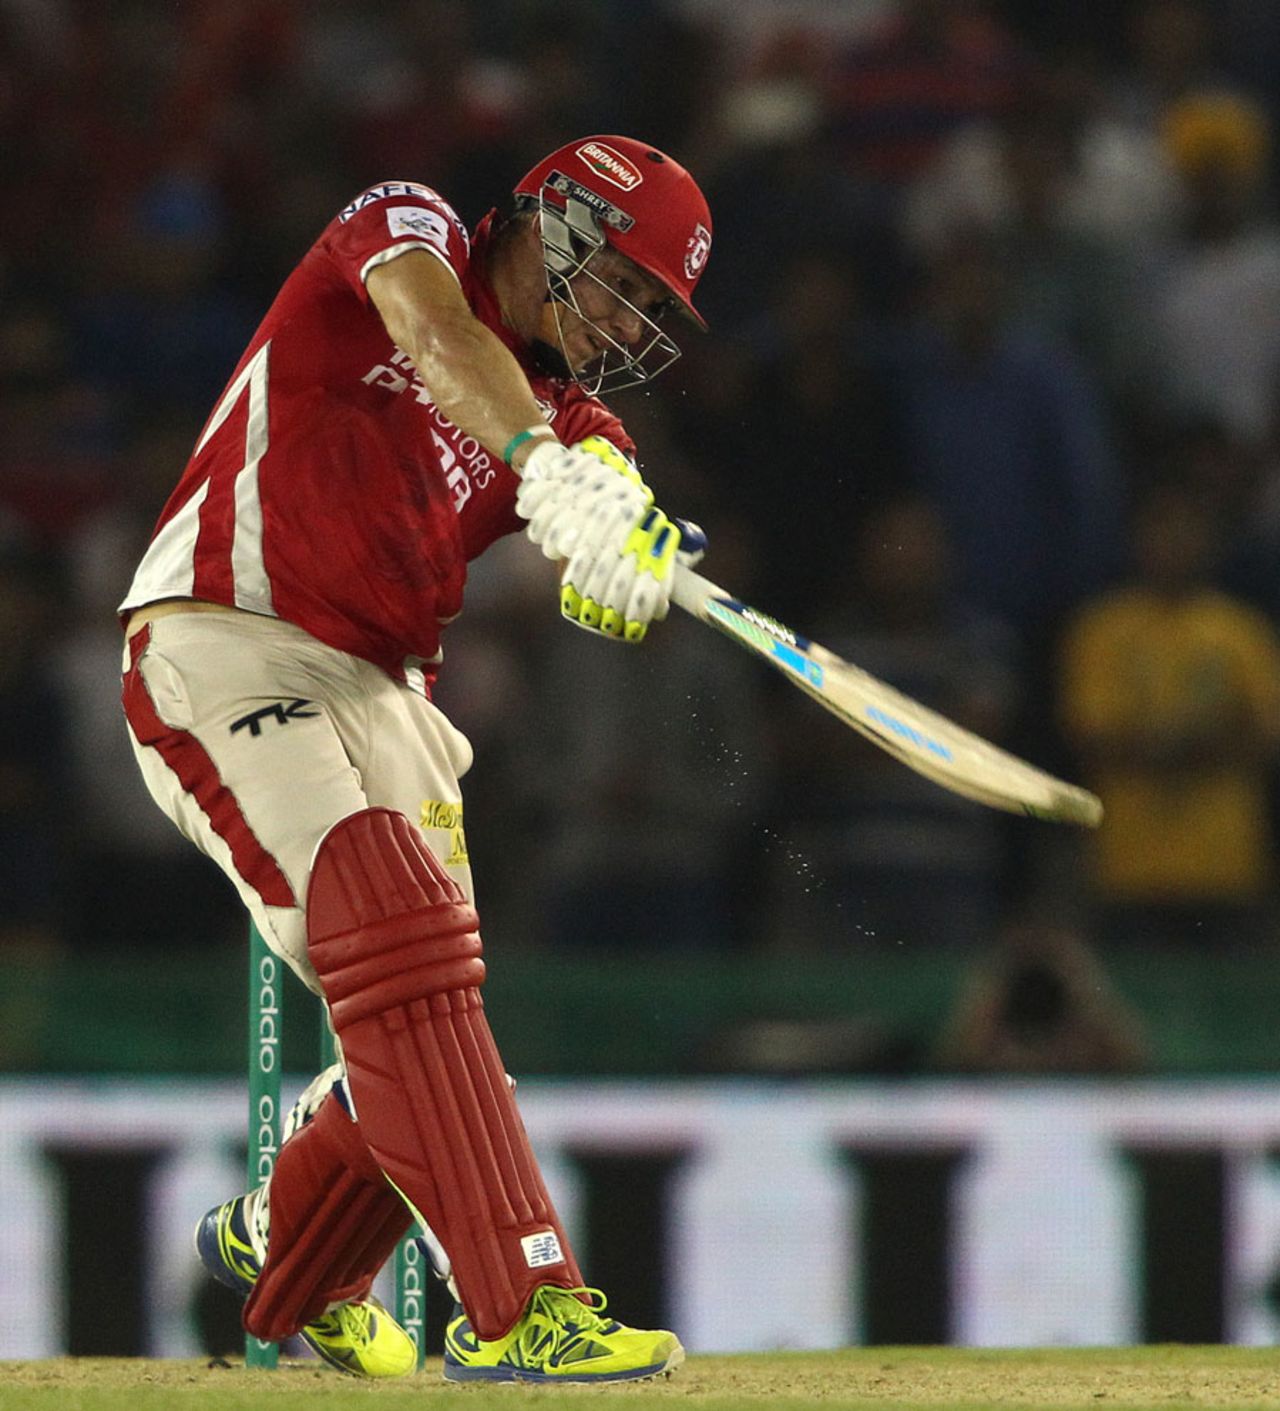 David Miller finishes it off with a punch over cover, Kings XI Punjab v Barbados Tridents, Champions League T20, Mohali, September 20, 2014